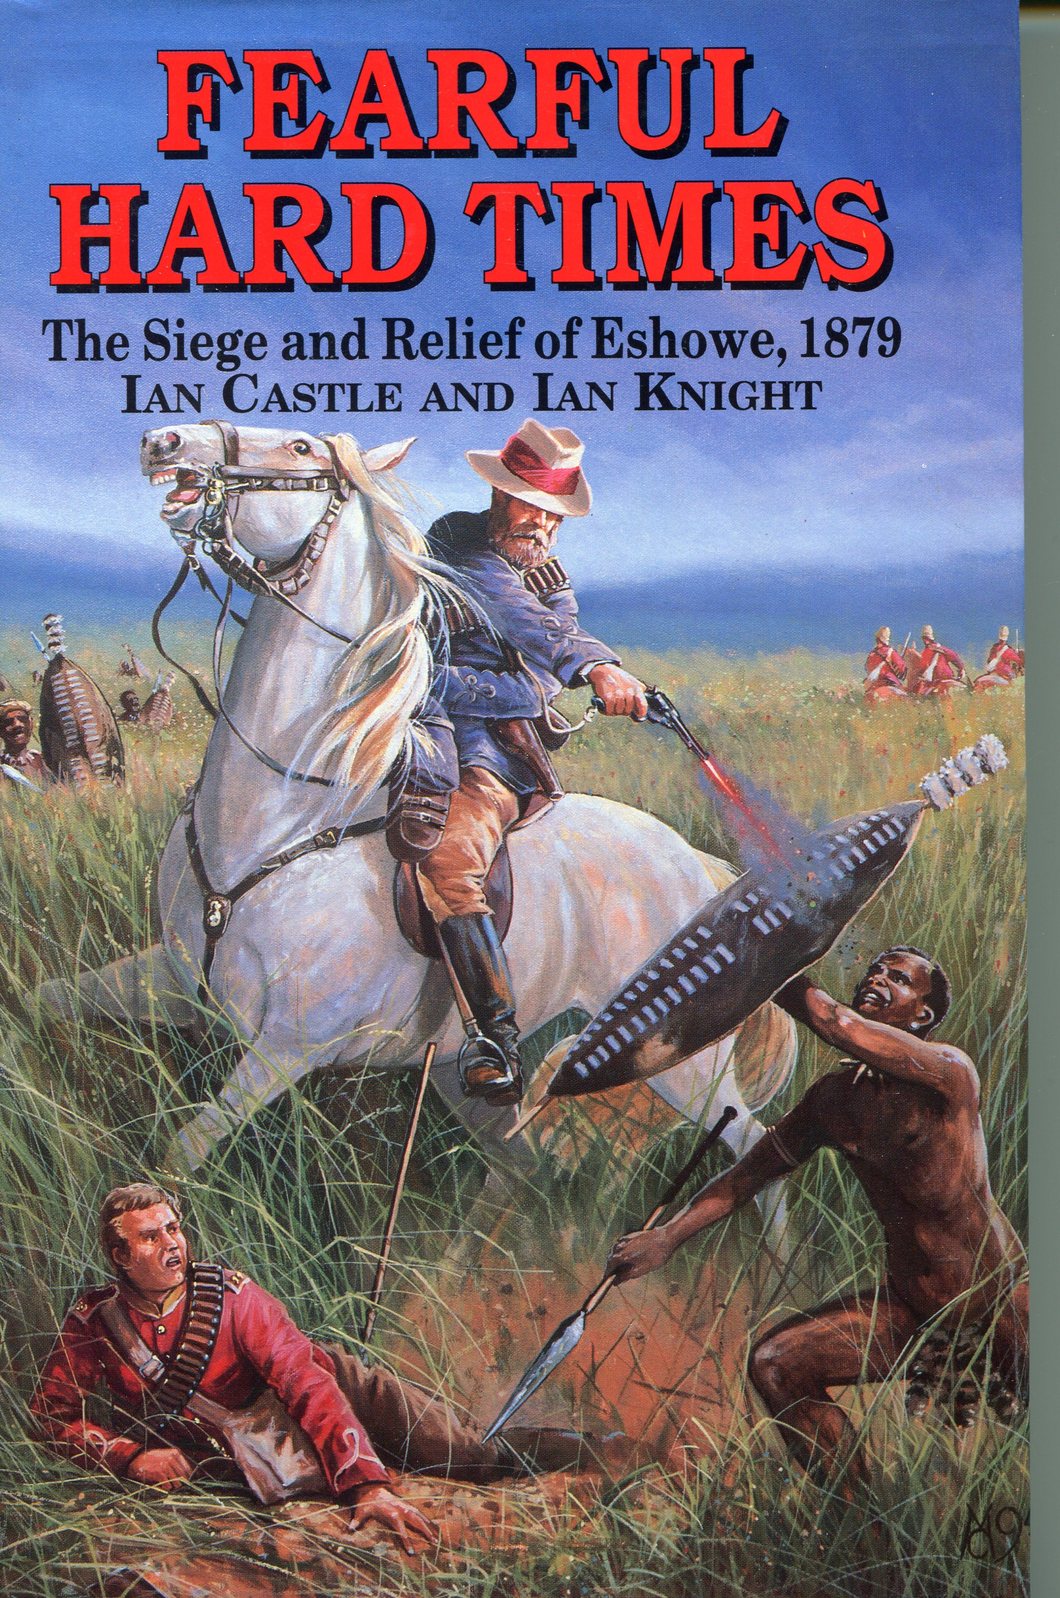 'FEARFUL HARD TIMES; THE SIEGE AND RELIEF OF ESHOWE' by Ian Castle and Ian Knight